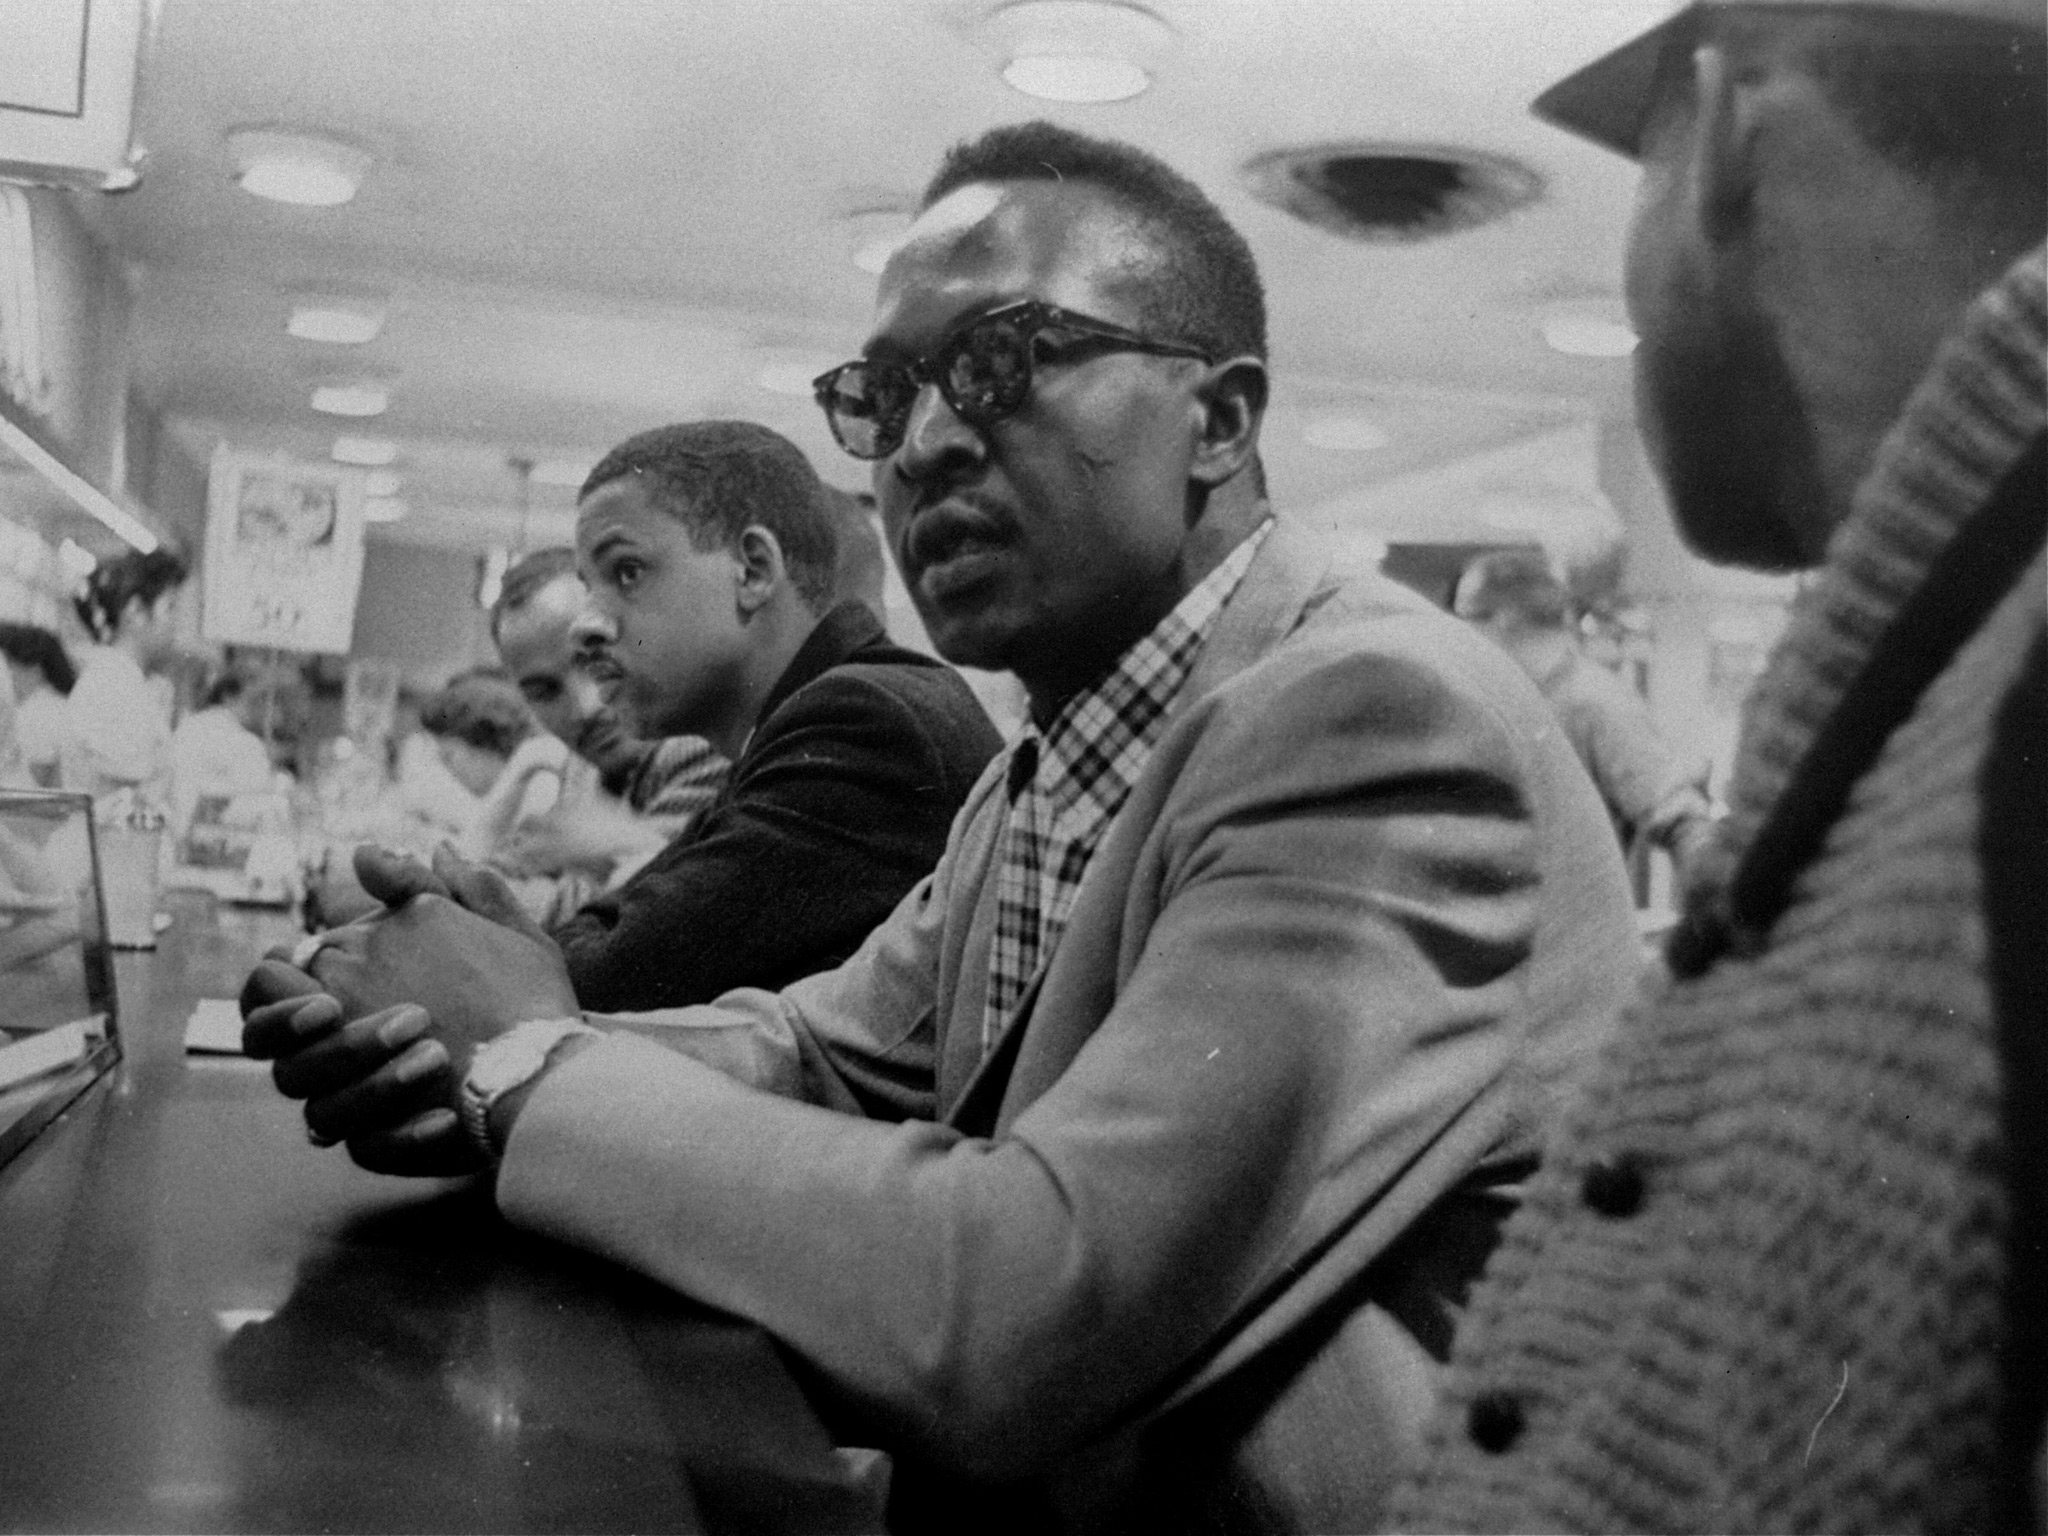 Greensboro lunch counter sit-in - picture of the day | Art and design | The Guardian2048 x 1536